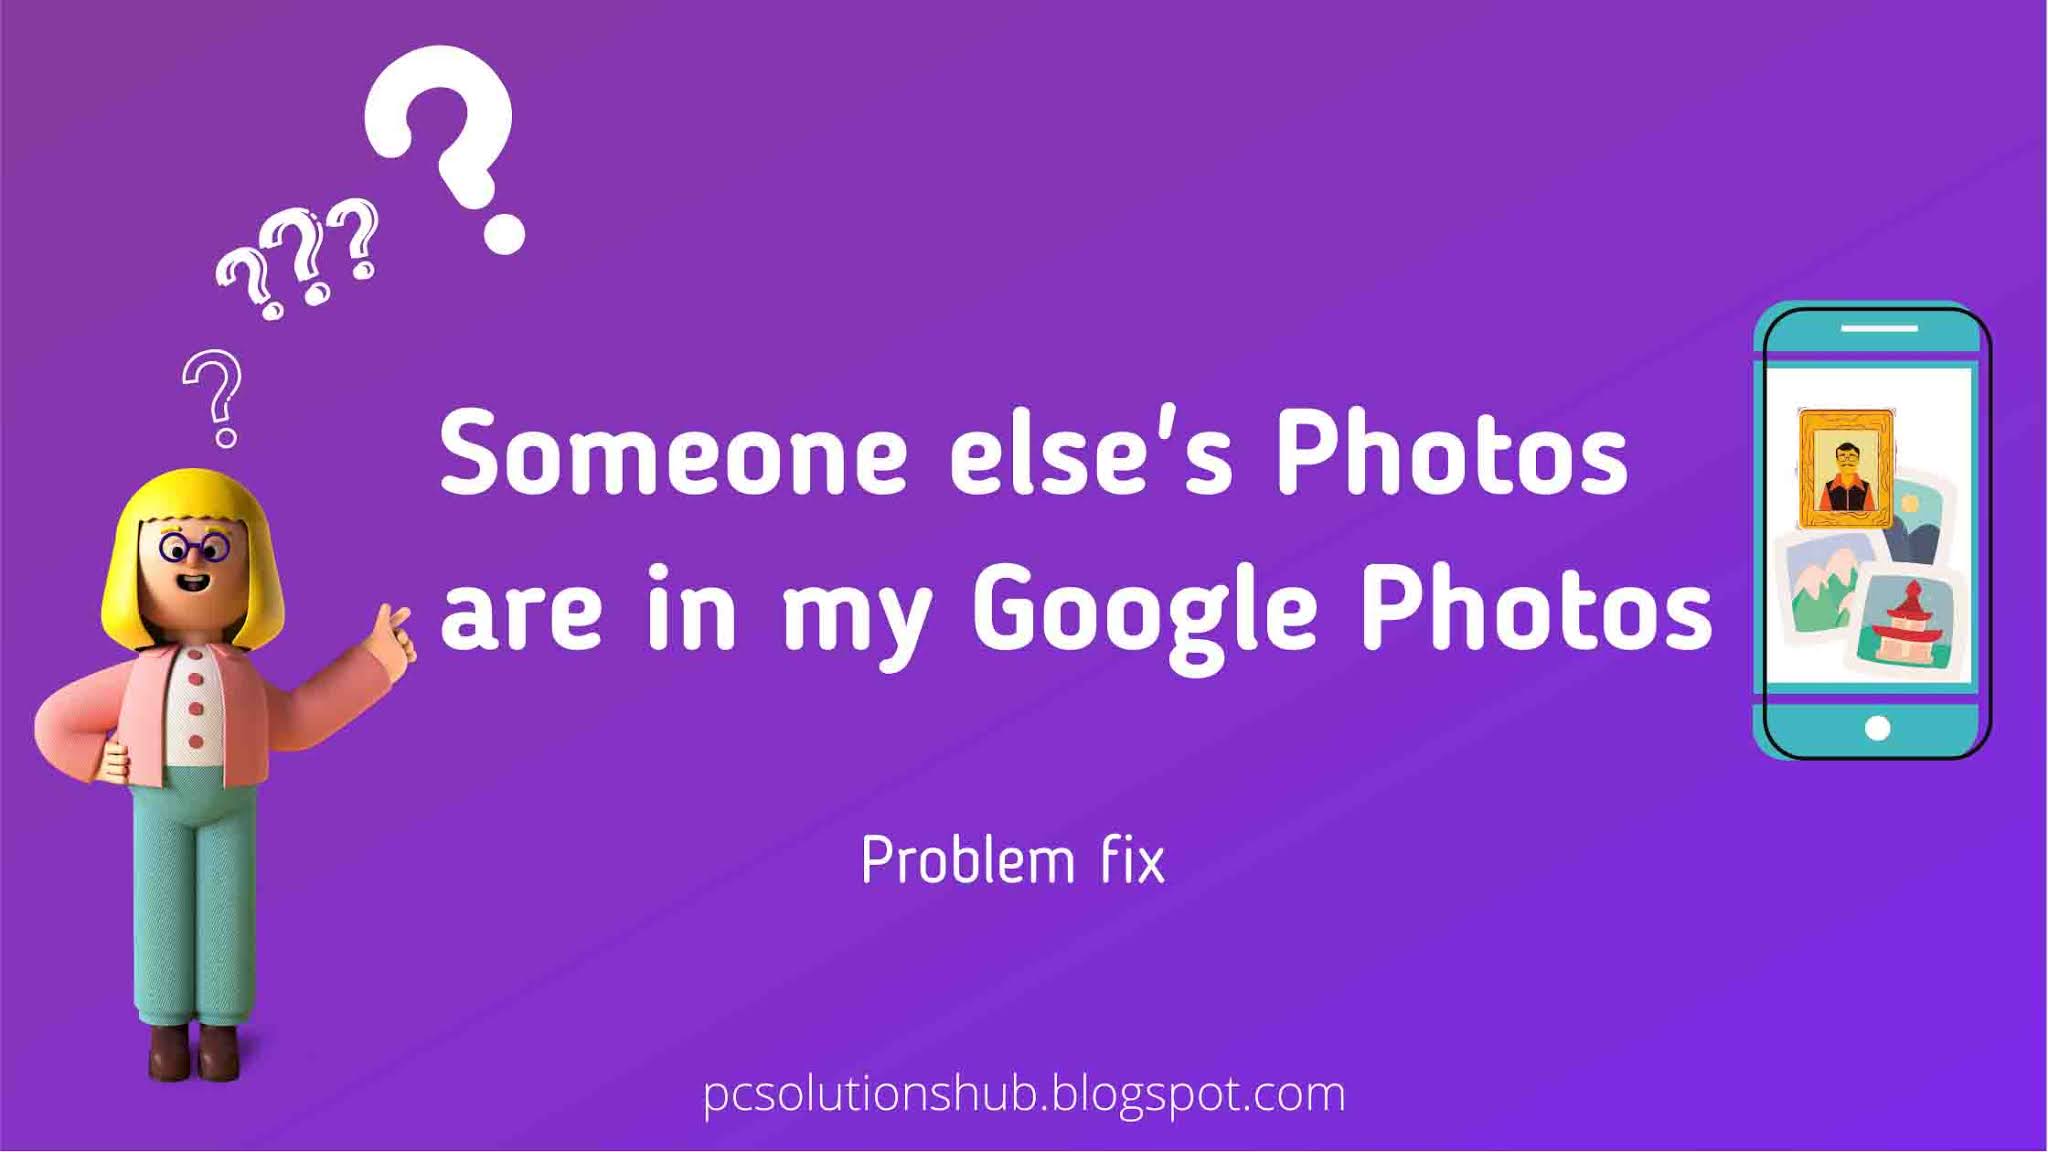 Someone else's Photos are in my Google Photos